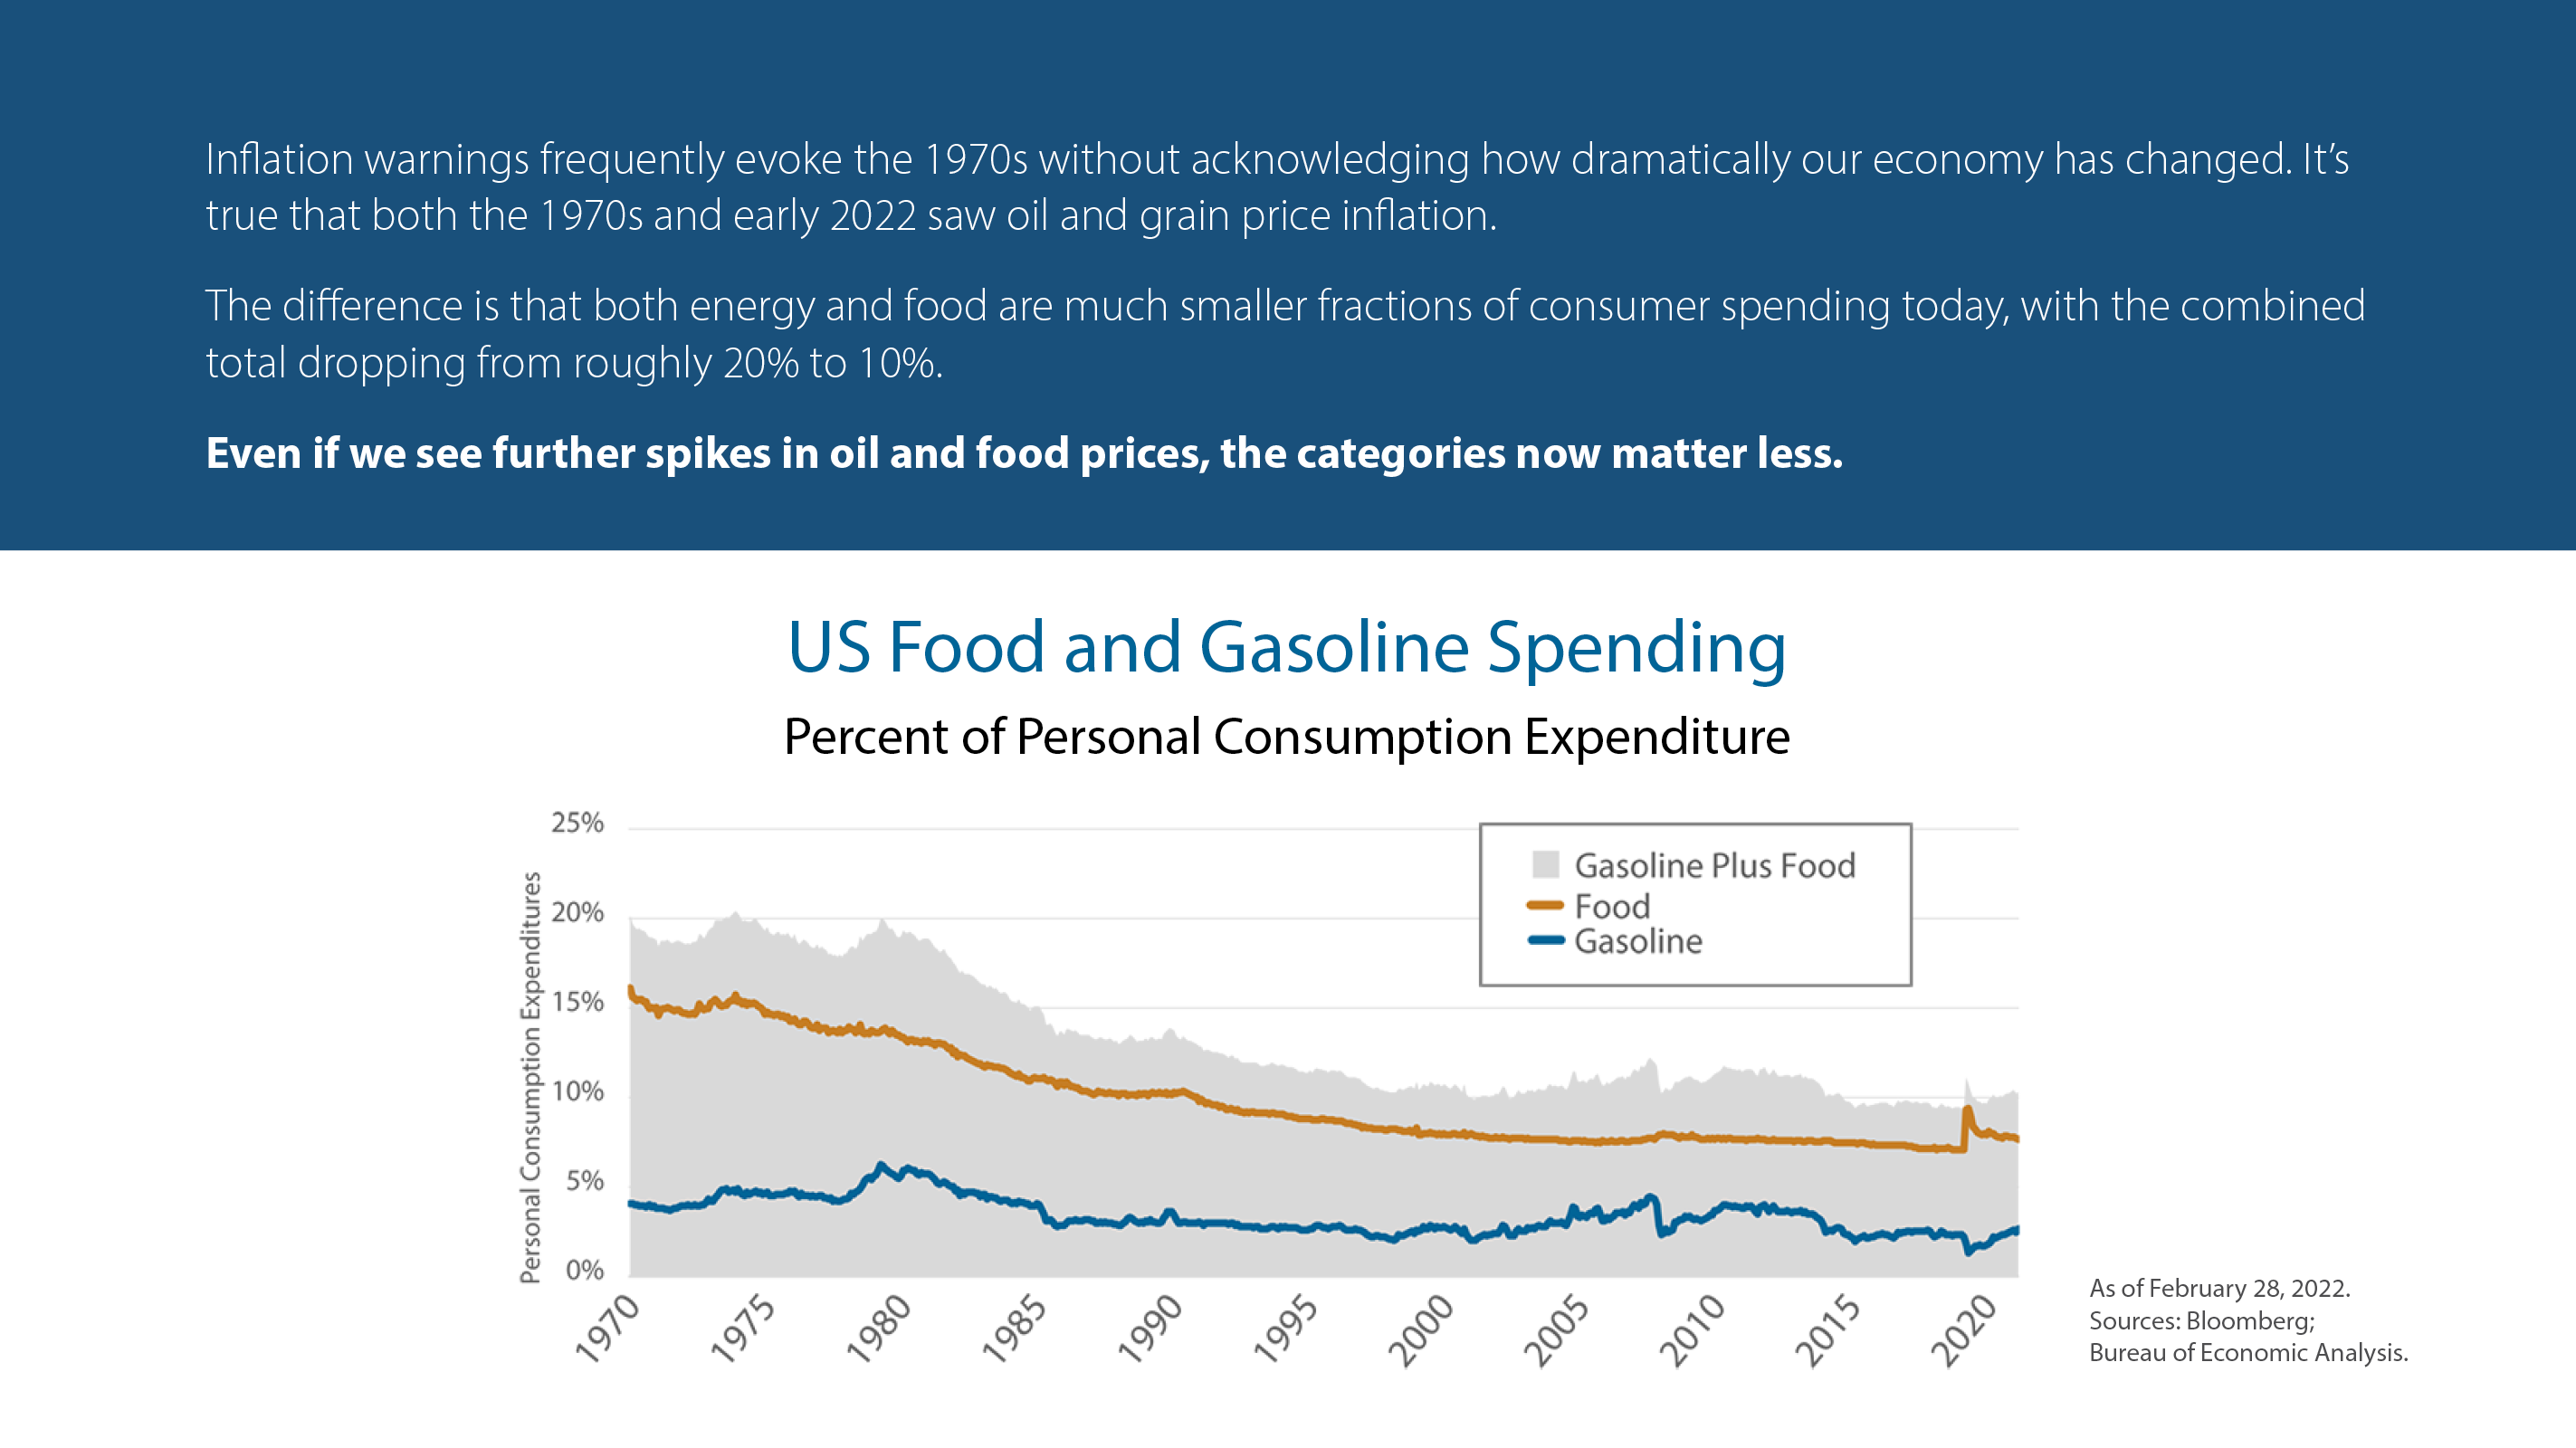 US Food and Gasoline Spending